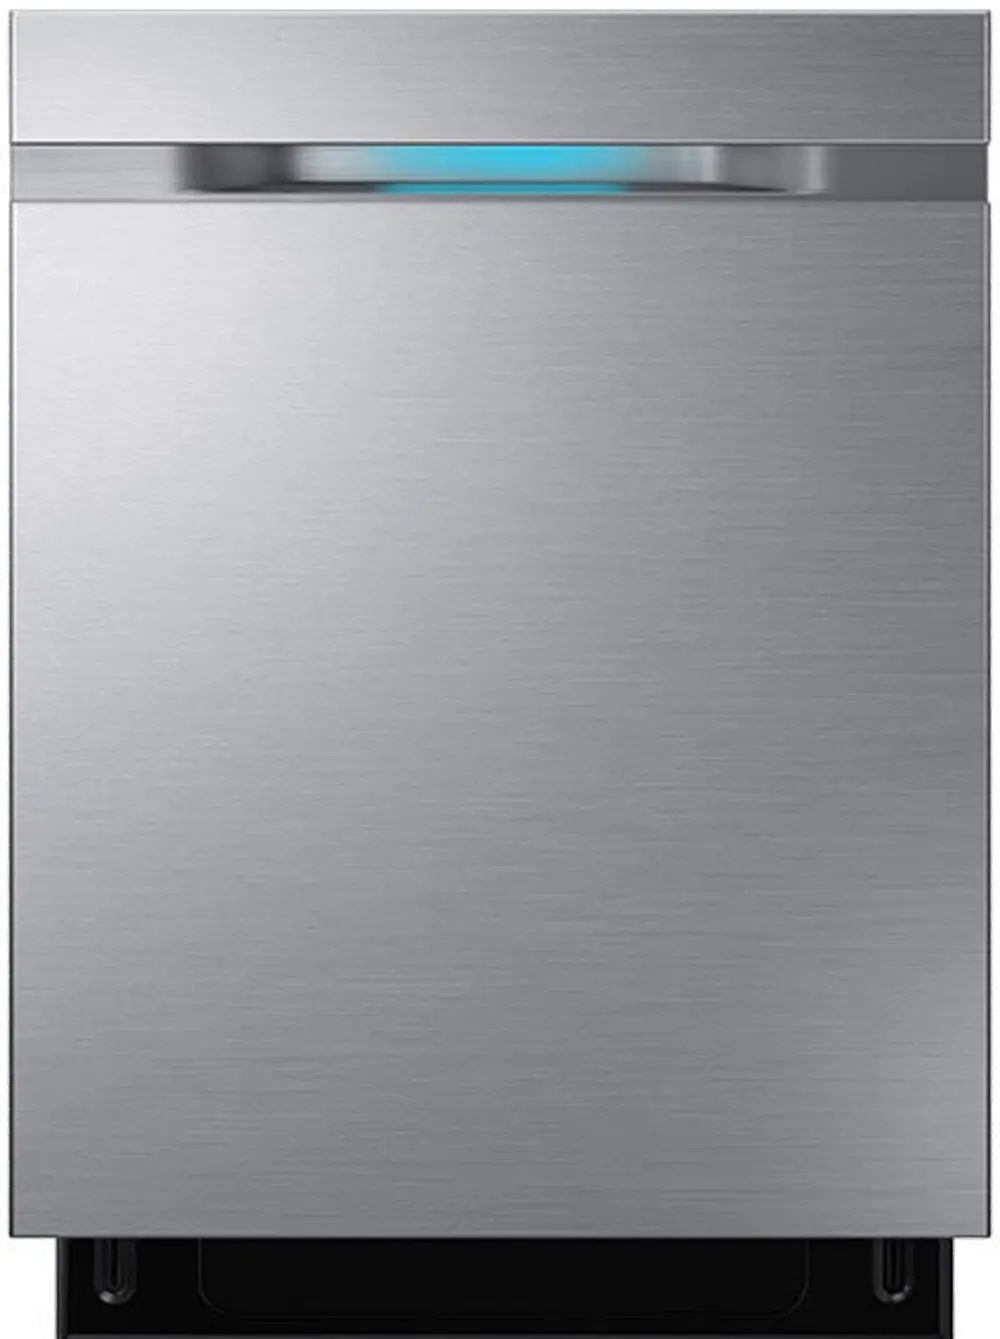 DW80J7550US Samsung 24 Inch Stainless Steel Built-in Dishwasher-1